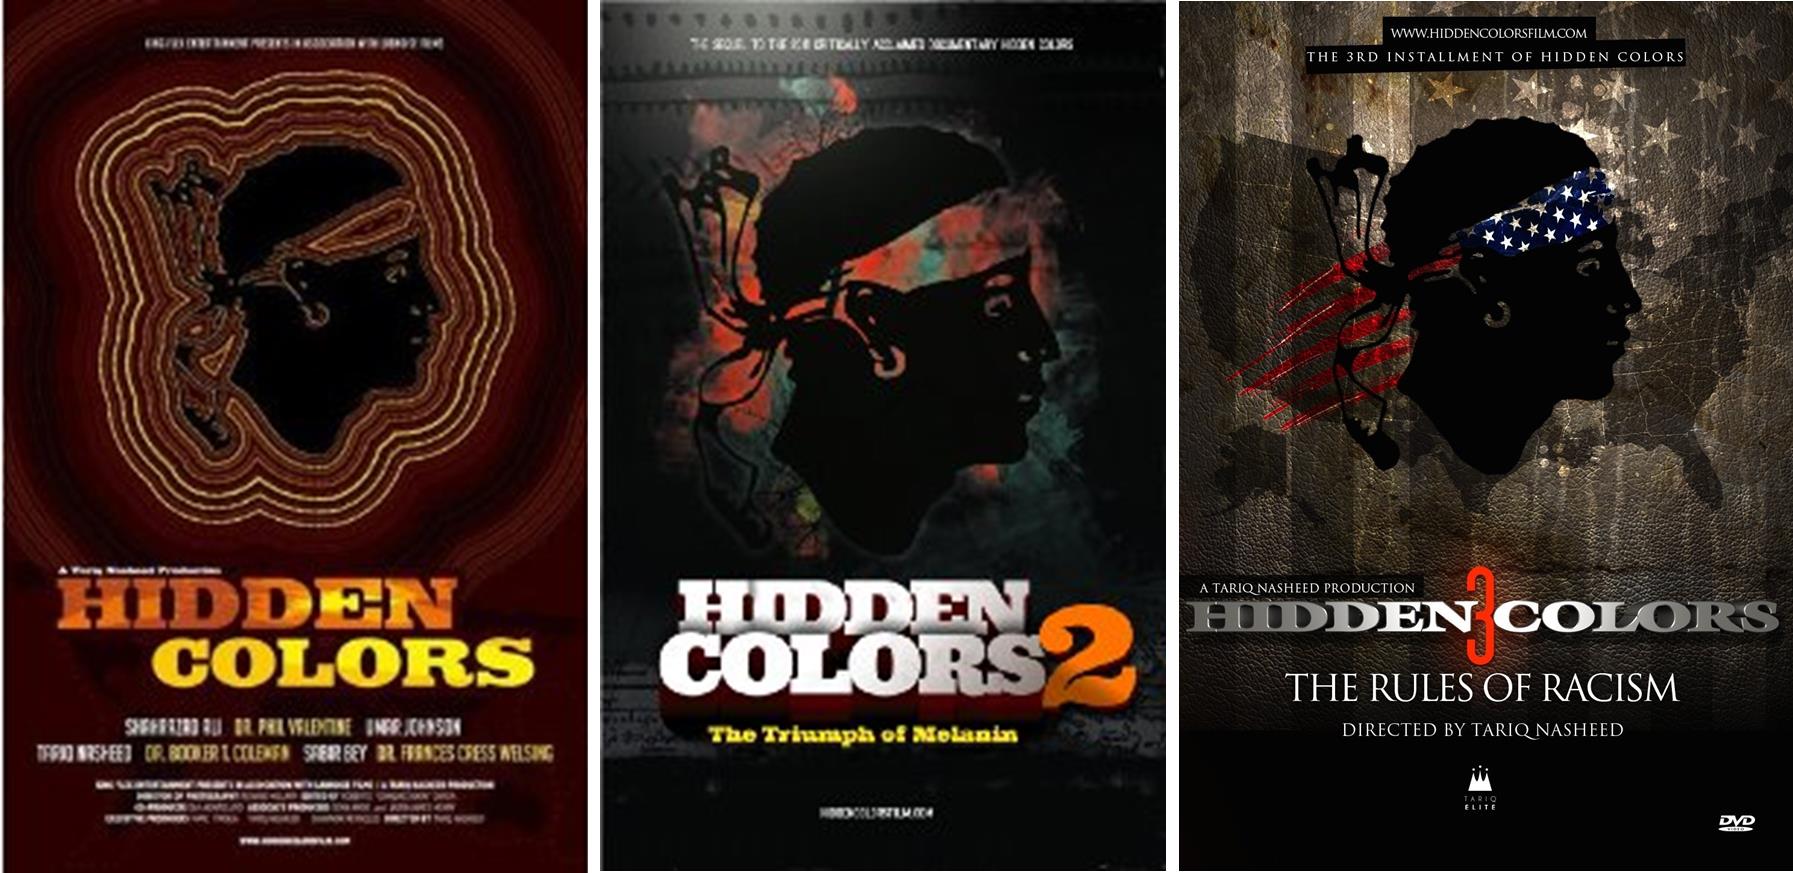 hidden colors 3 documentary full movie download